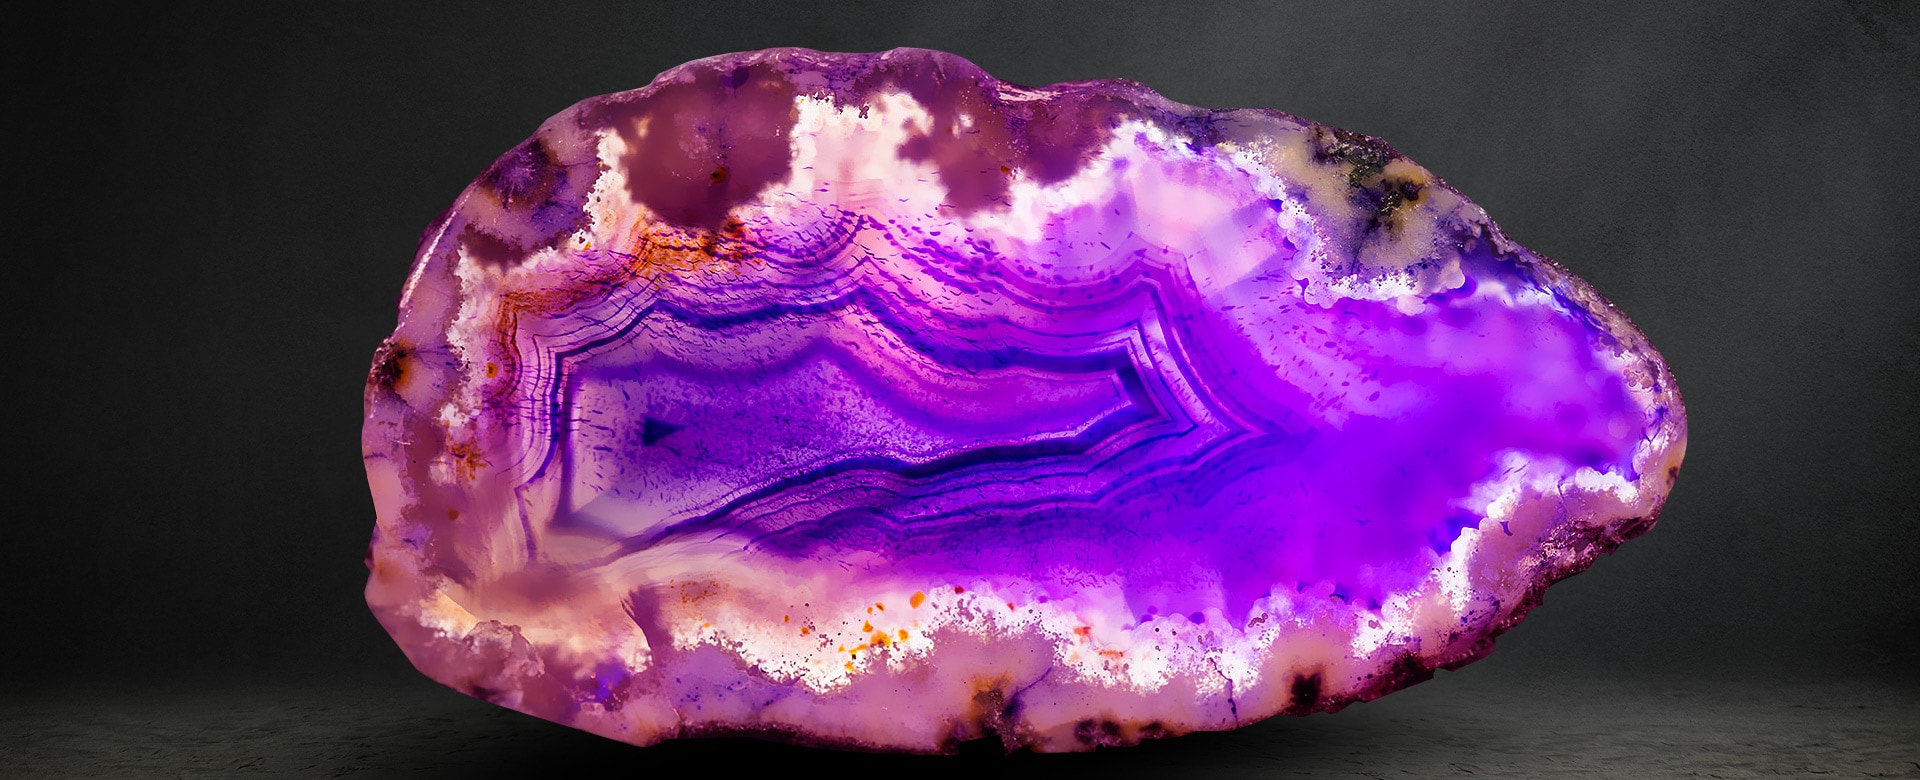 Purple Agate Meaning and Properties 1